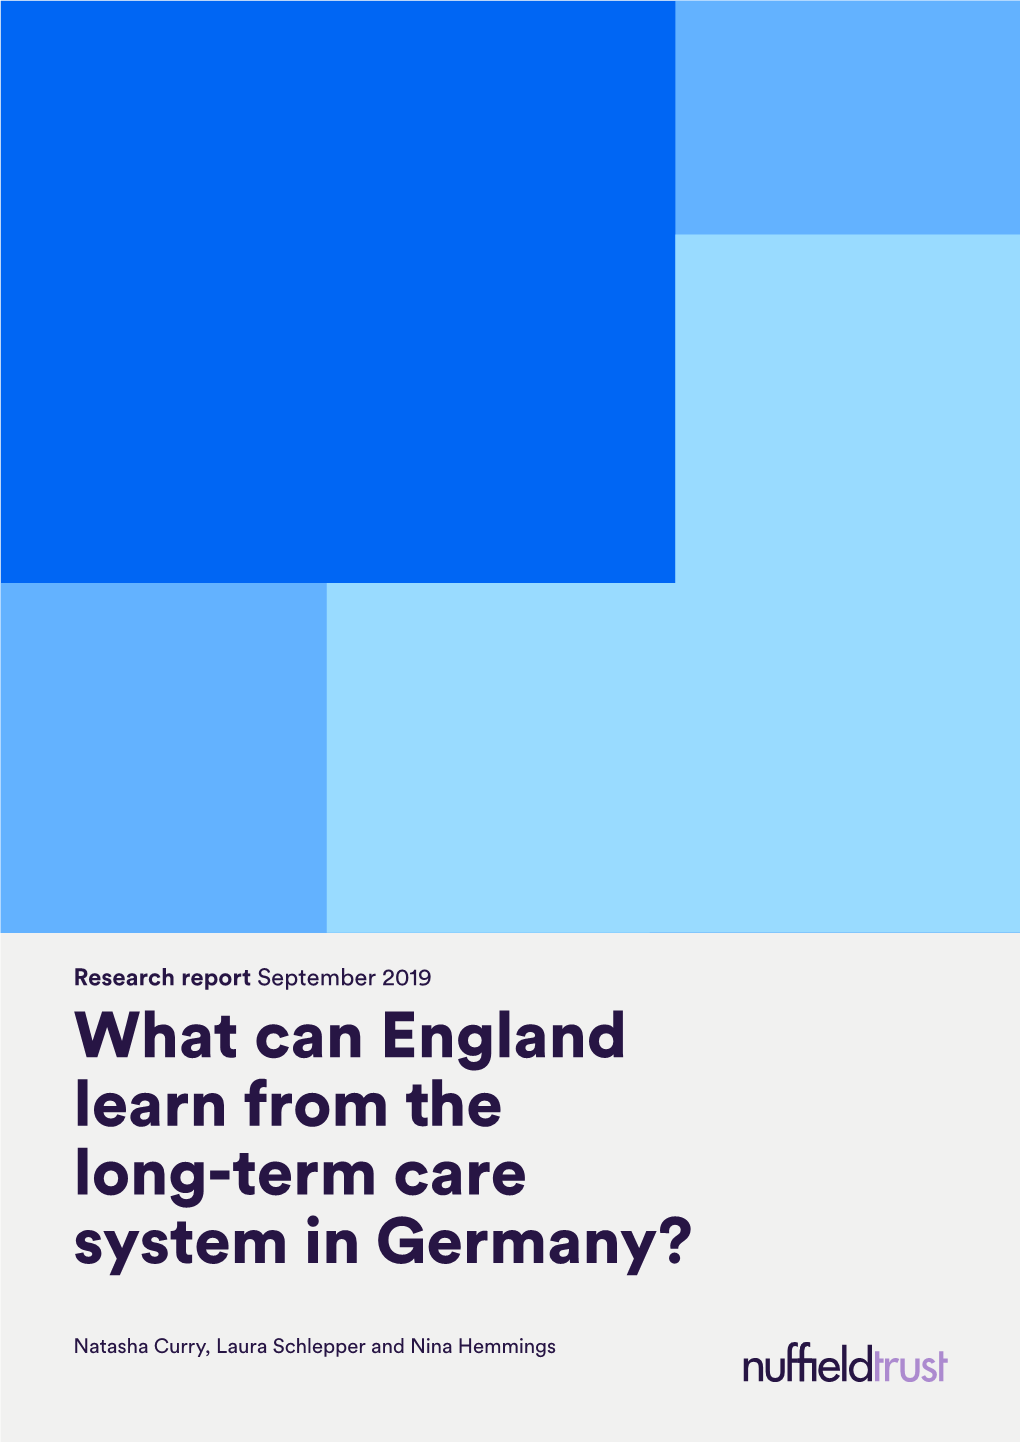 What Can England Learn from the Long-Term Care System in Germany?